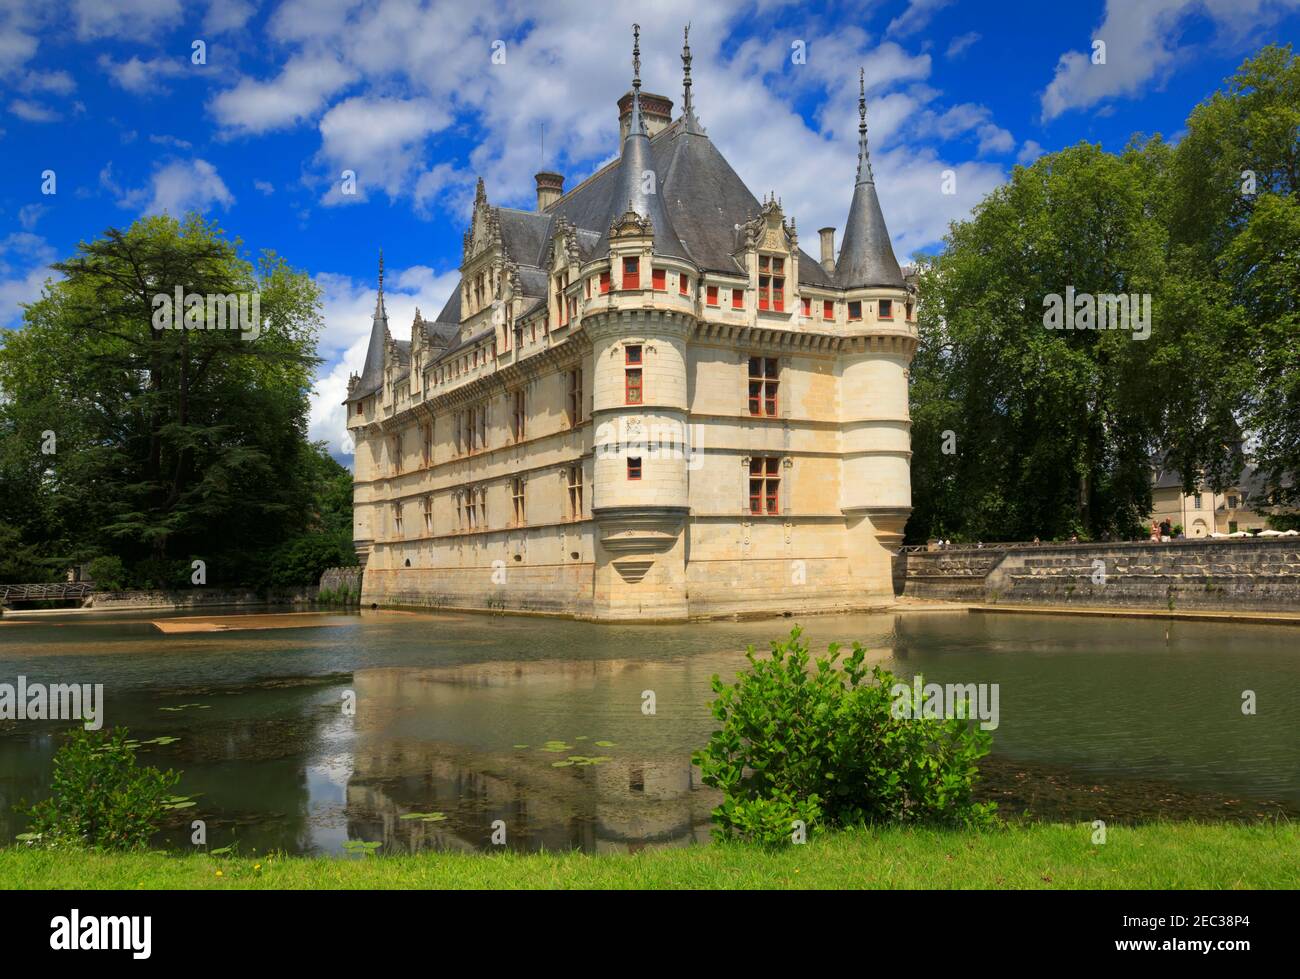 Chateau of Azay-le-Rideau, France. Built in the reign of Francois I by  Gilles Berthelot, one of the earliest Renaissance chateaux Stock Photo -  Alamy